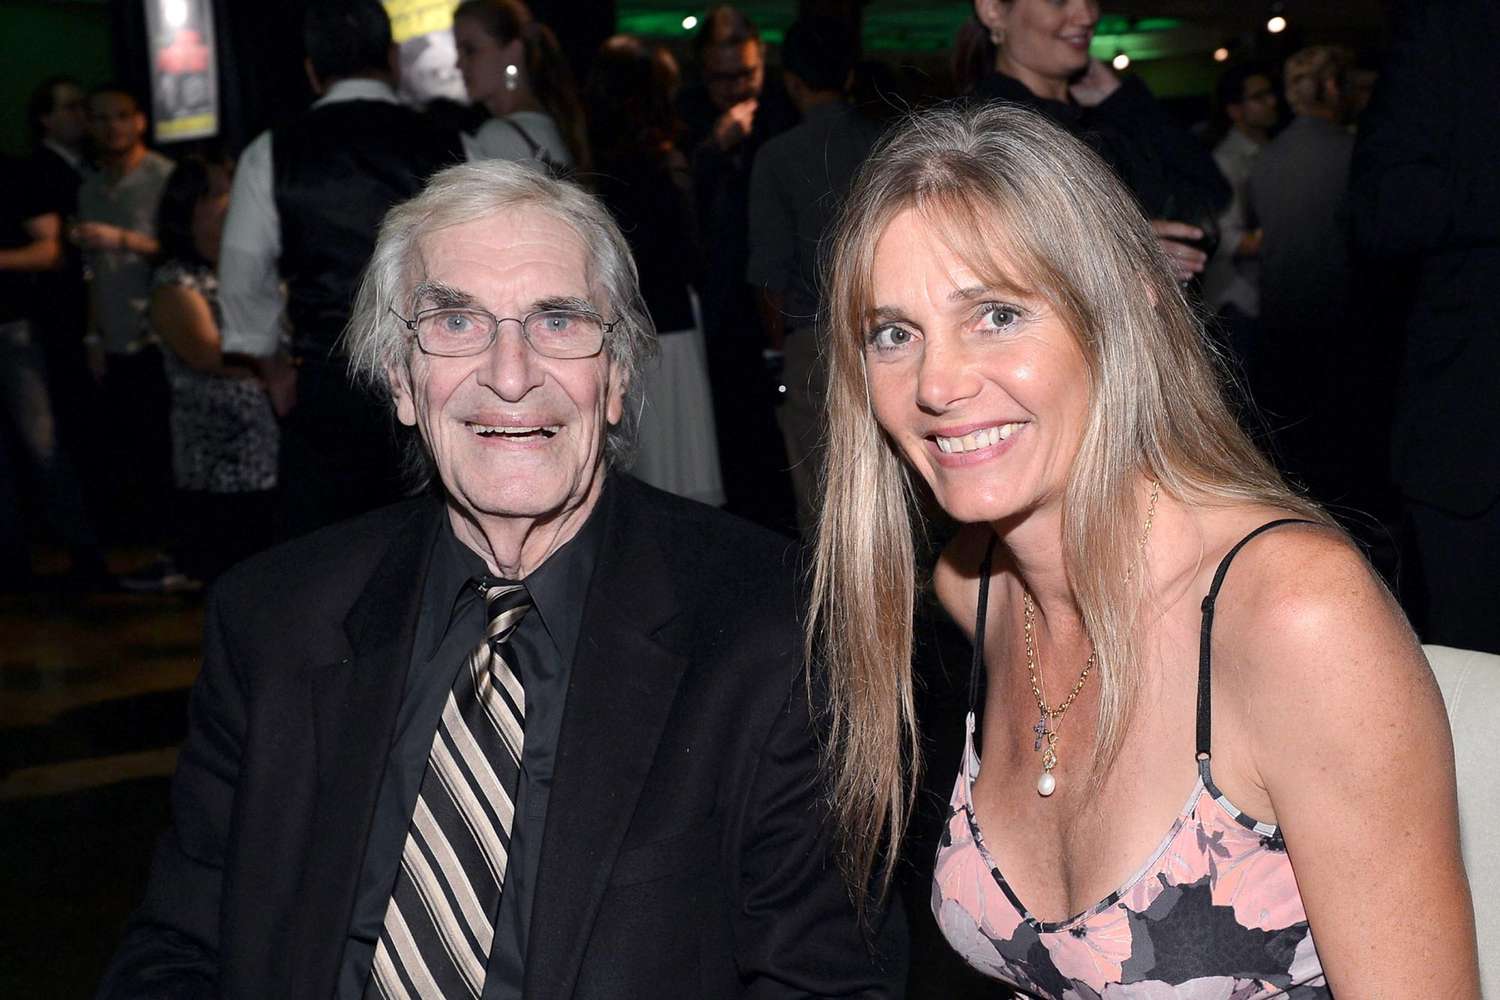 Landau and Gretchen Becker at the Frankenweenie premiere after party in Hollywood, 2012